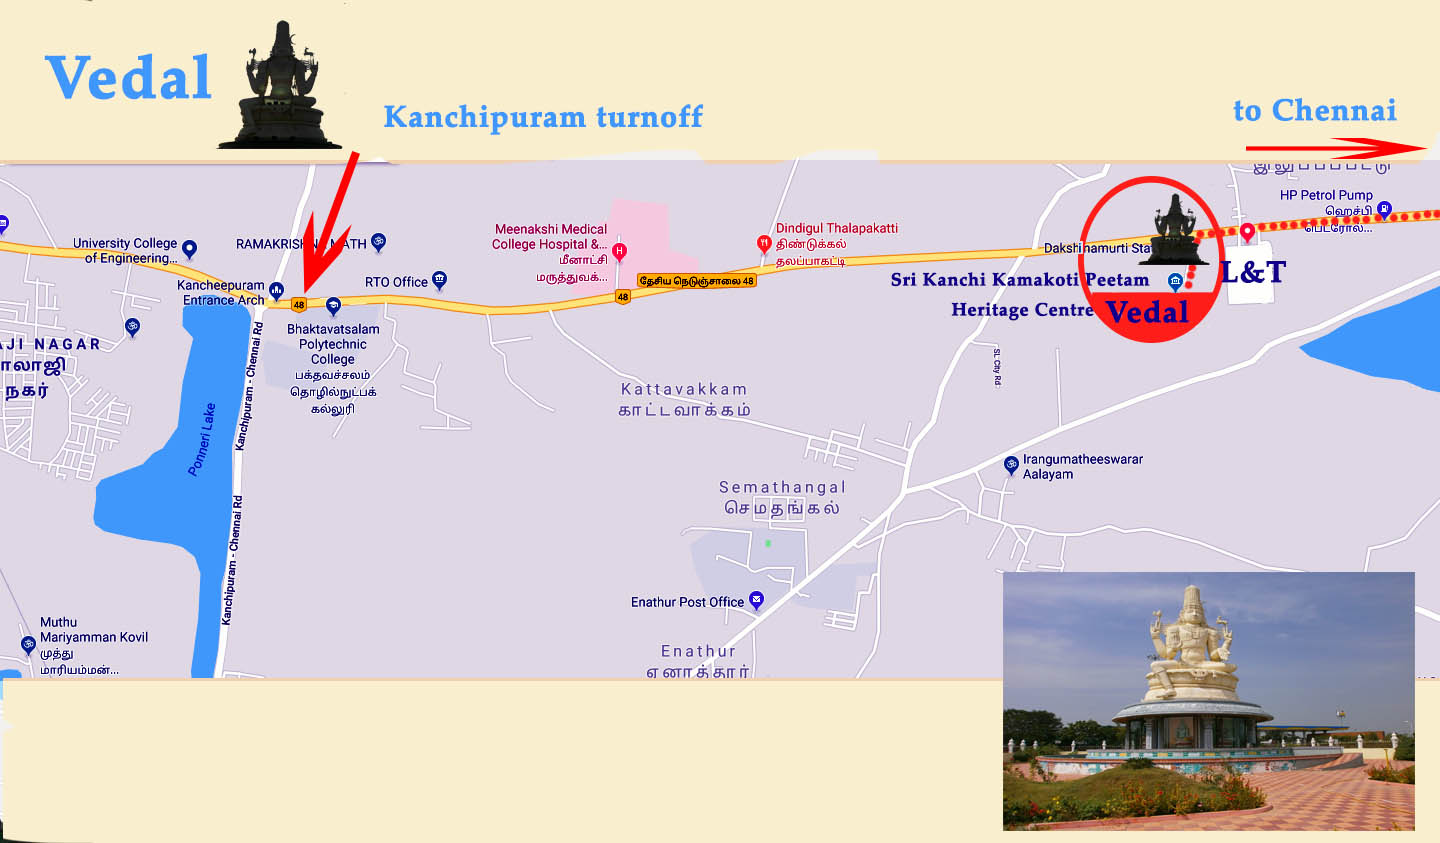 Vedal Map Kanchi Mutt location